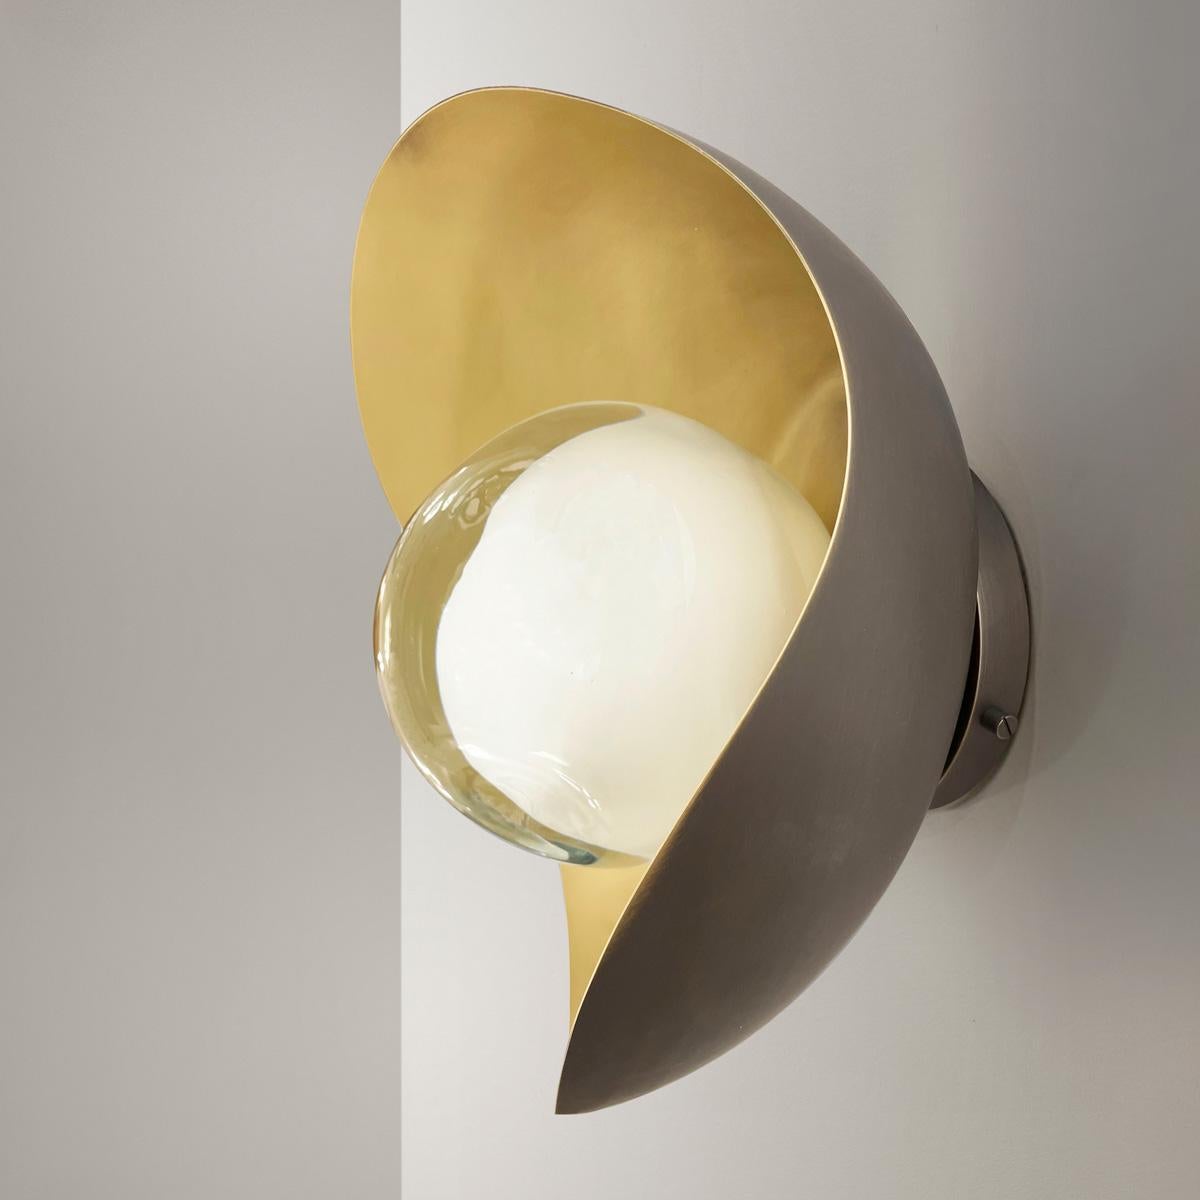 Perla Wall Light by Gaspare Asaro-Satin Brass/Polished Nickel Finish For Sale 1